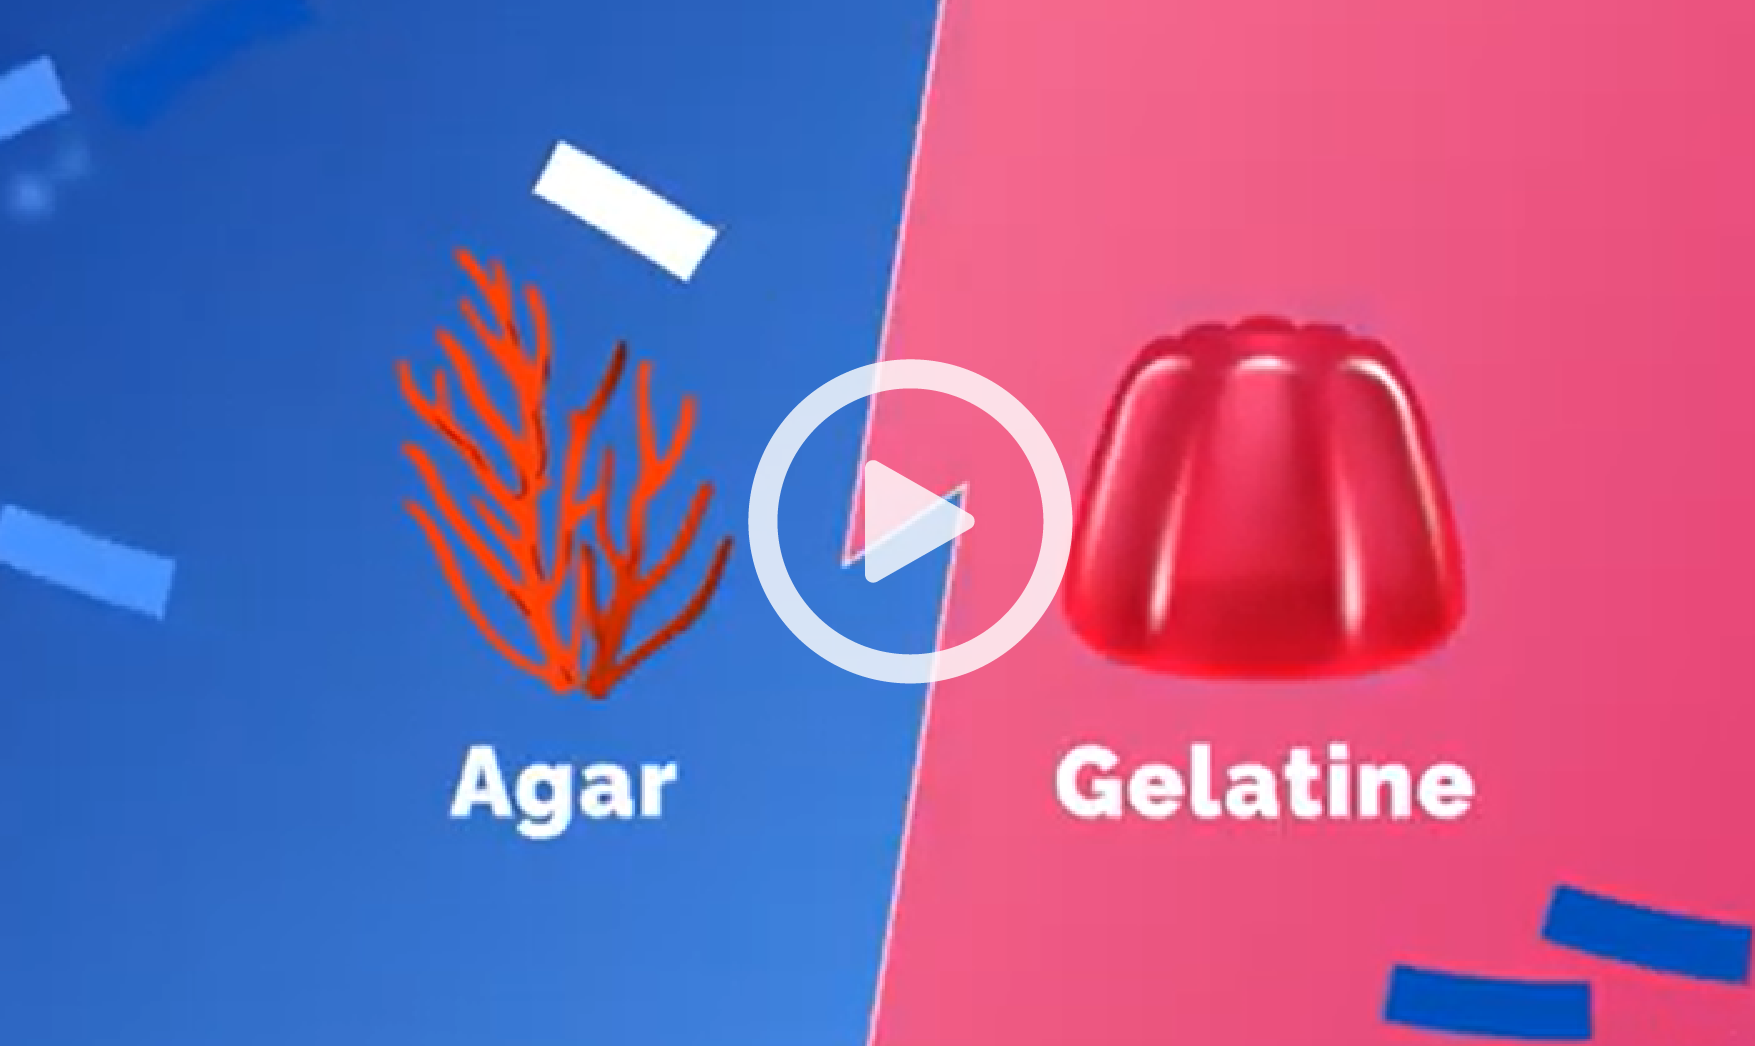 differences between agar and gelatine